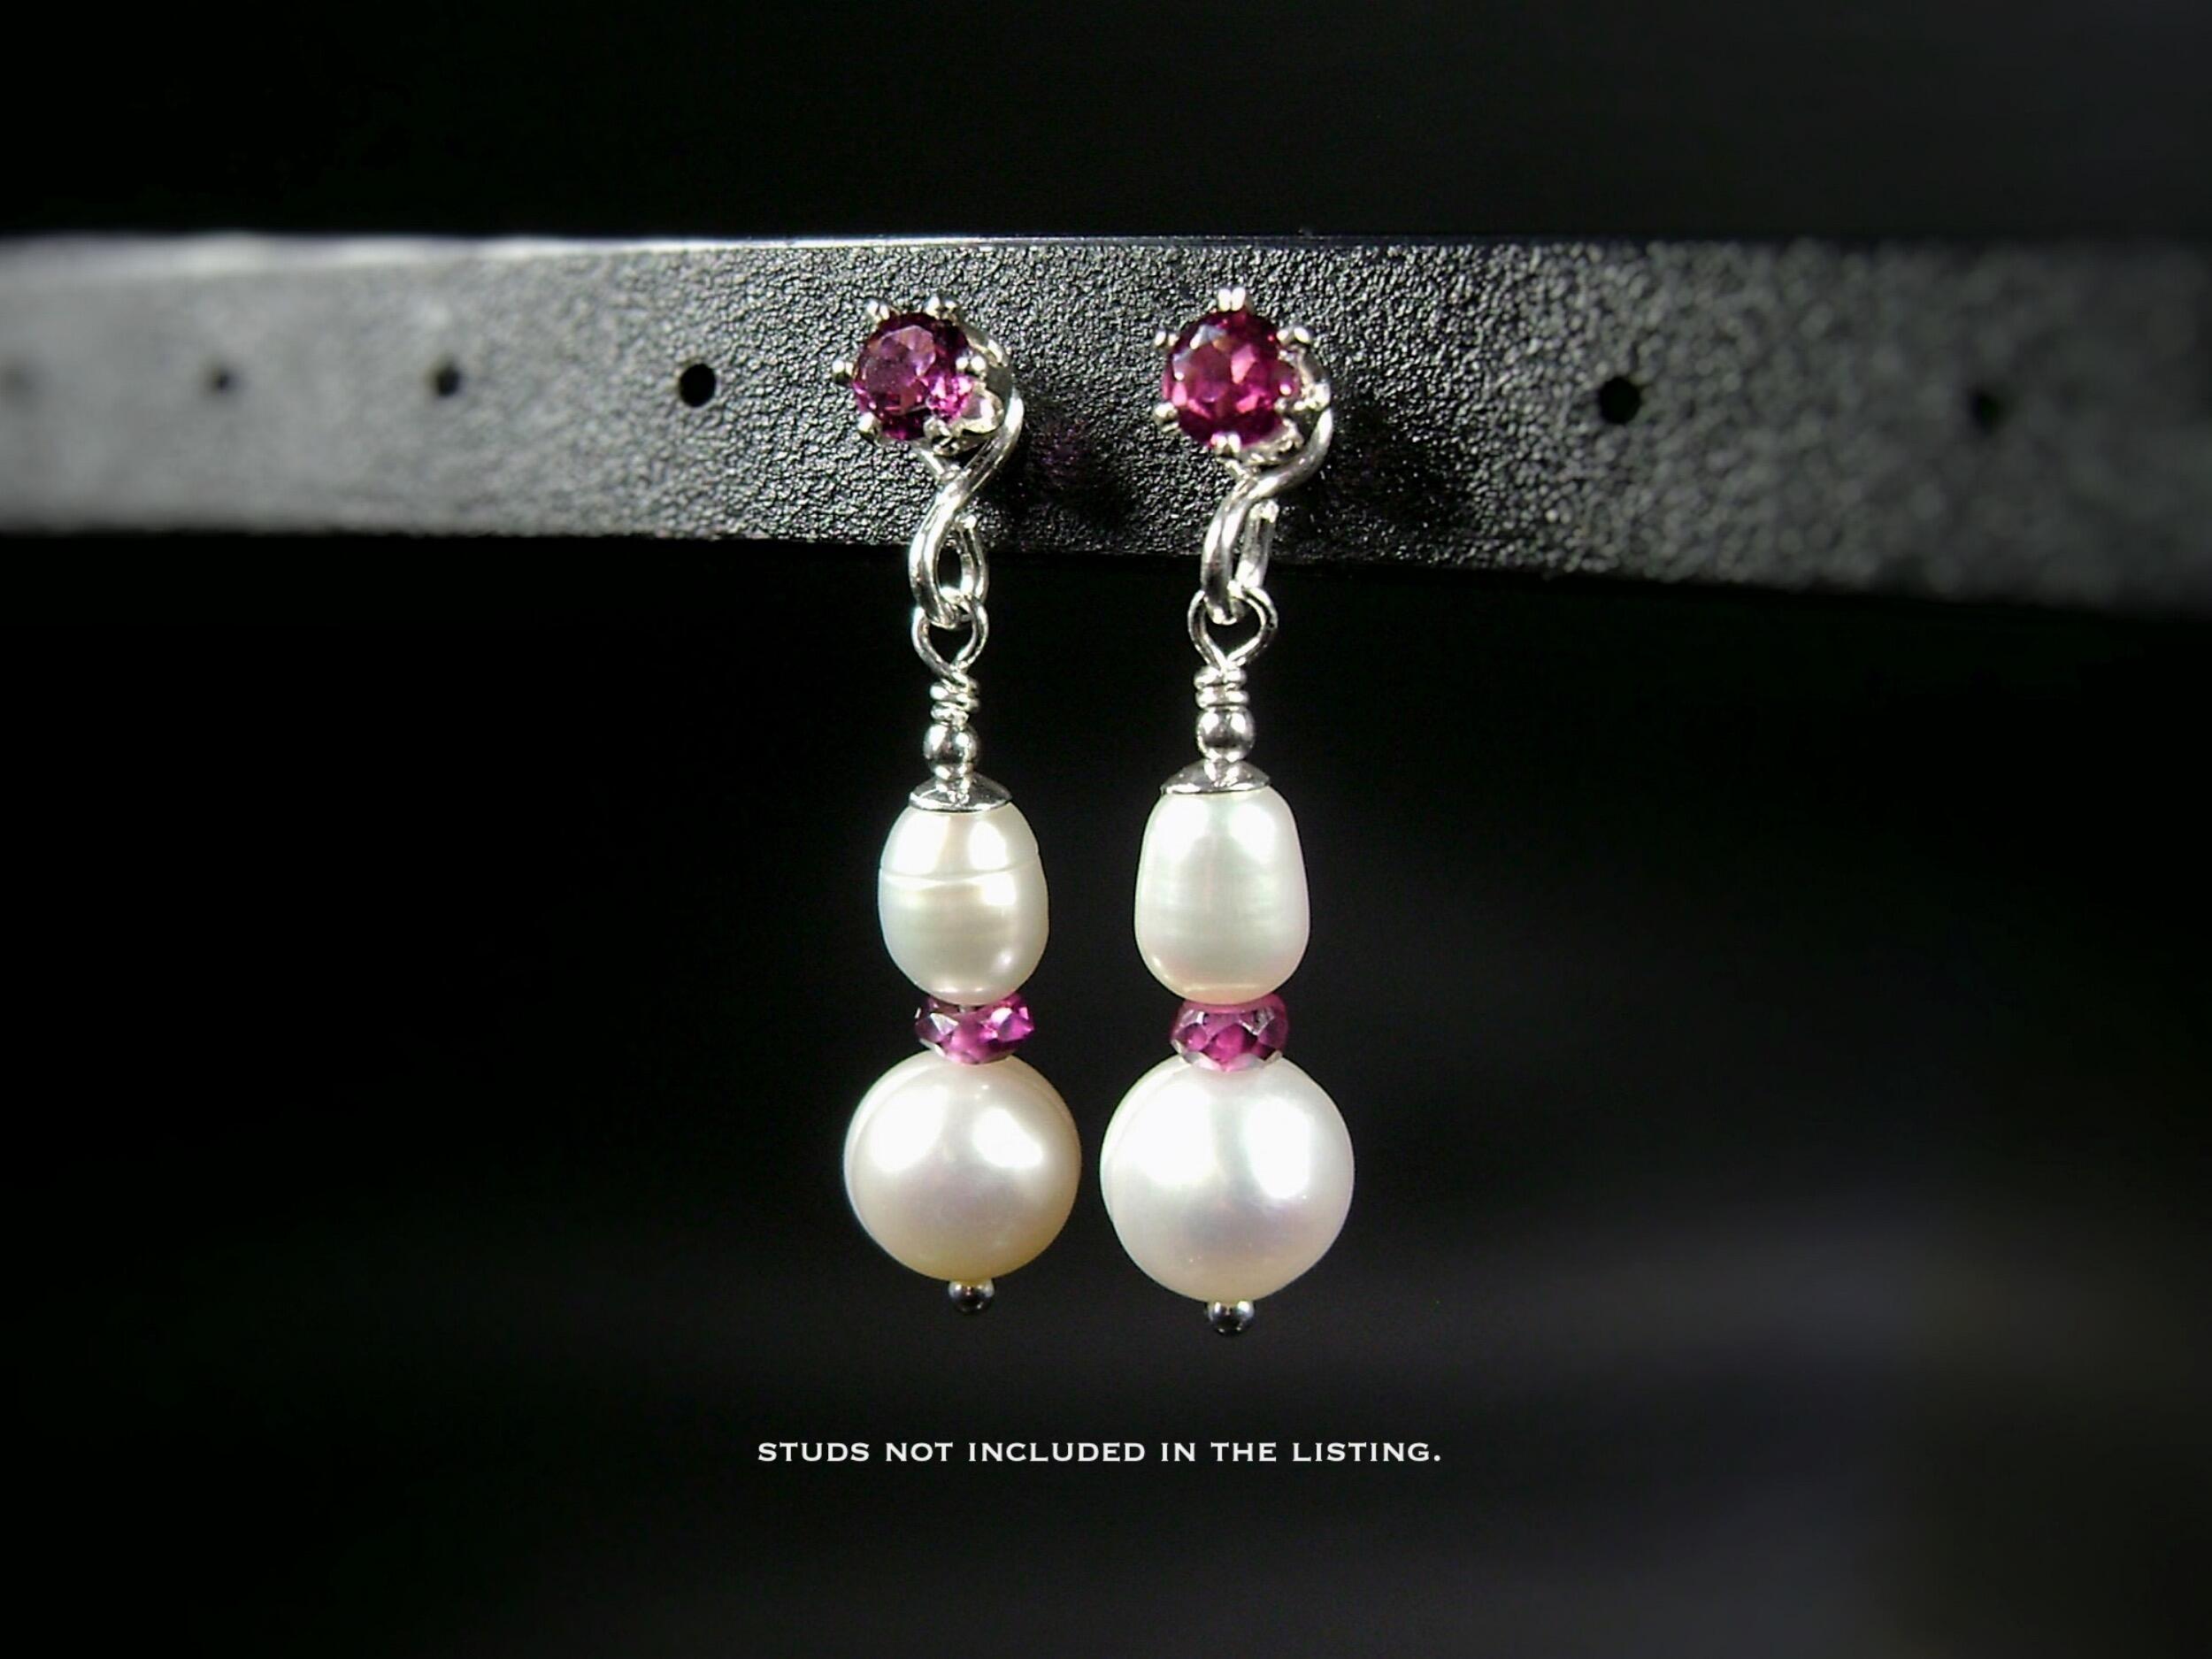 ​This is a lovely pair of pearl and rhodolite garnet earring jackets. They are made with cultured freshwater pearls and with faceted pink rhodolite rondelles and sterling silver beads. By MariesGems.